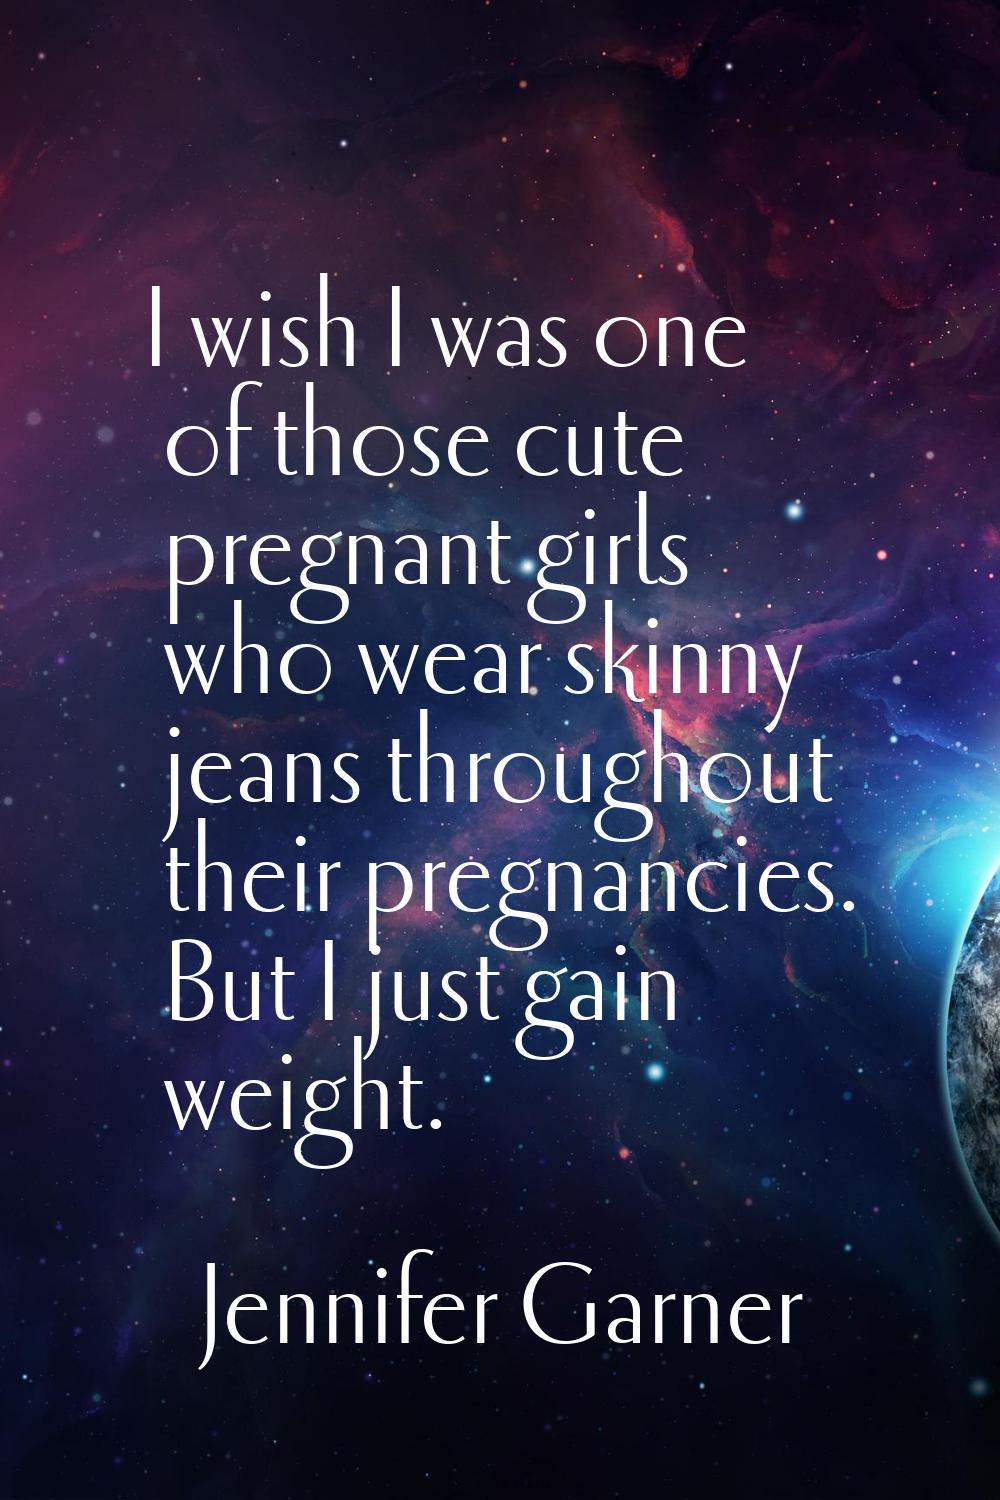 I wish I was one of those cute pregnant girls who wear skinny jeans throughout their pregnancies. B